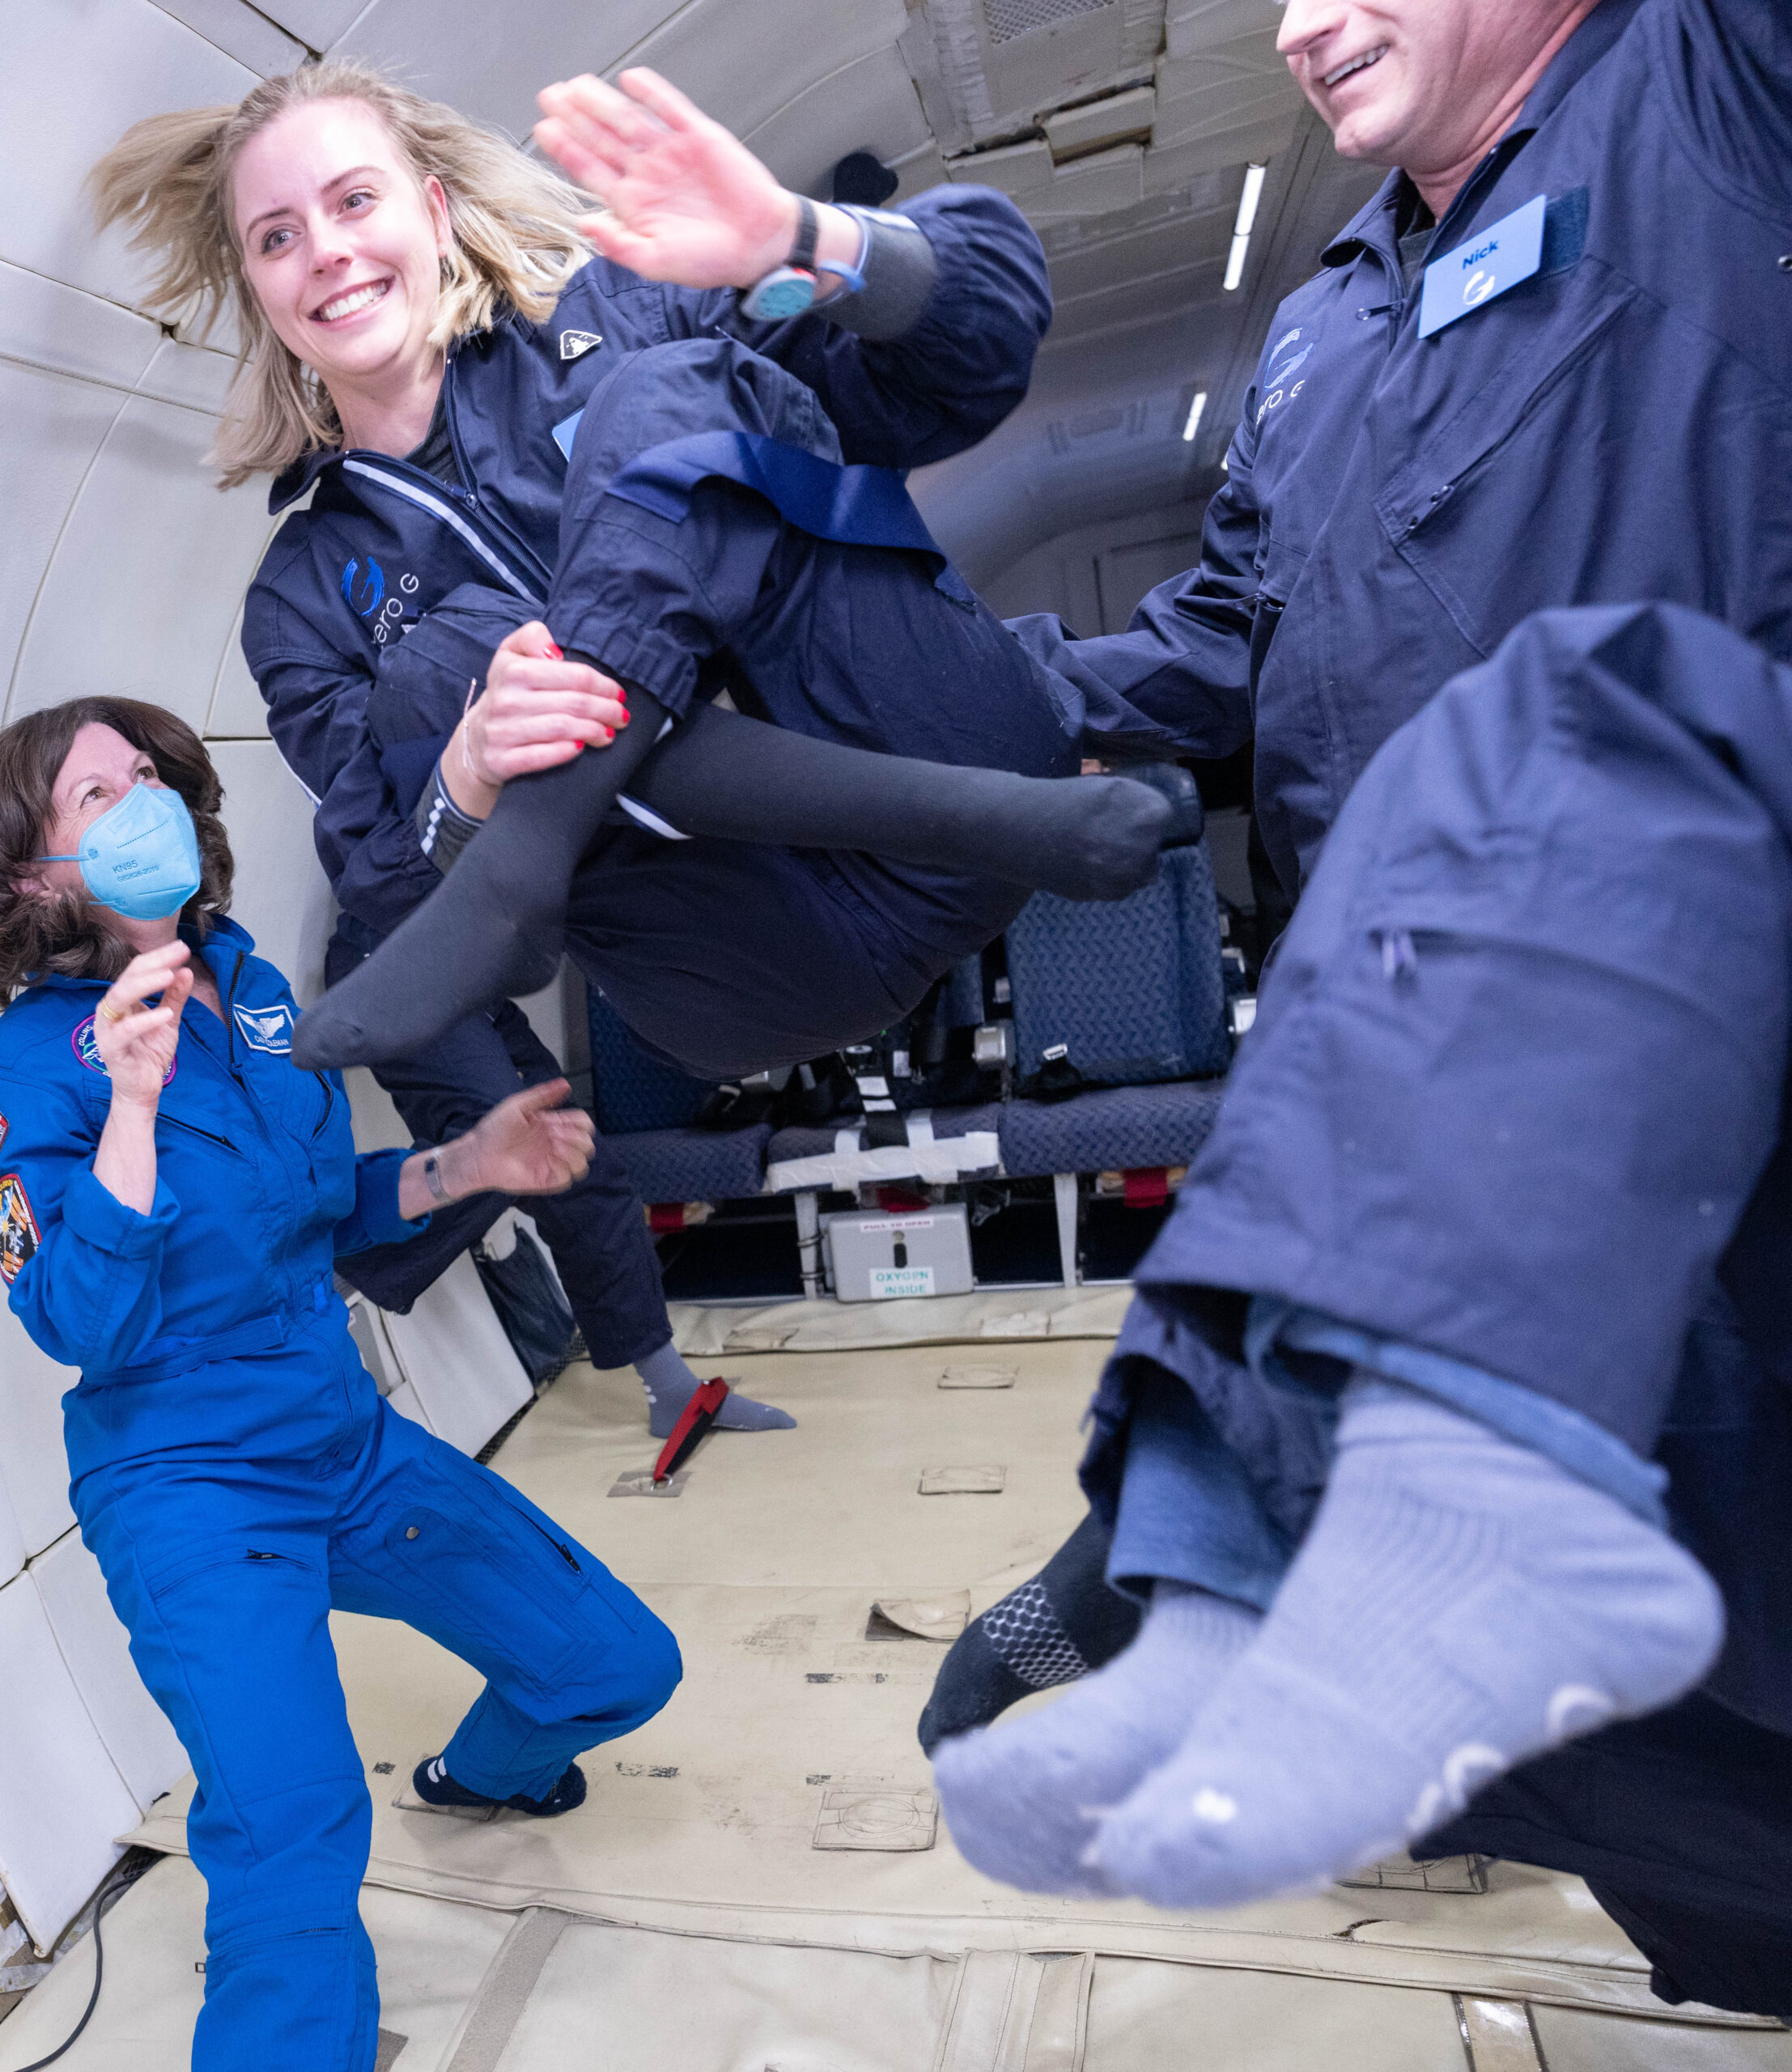 Michi, a German aerospace engineering student who uses a wheelchair, floats in zero-gravity to investigate accessibility techniques for future space vehicles and space stations